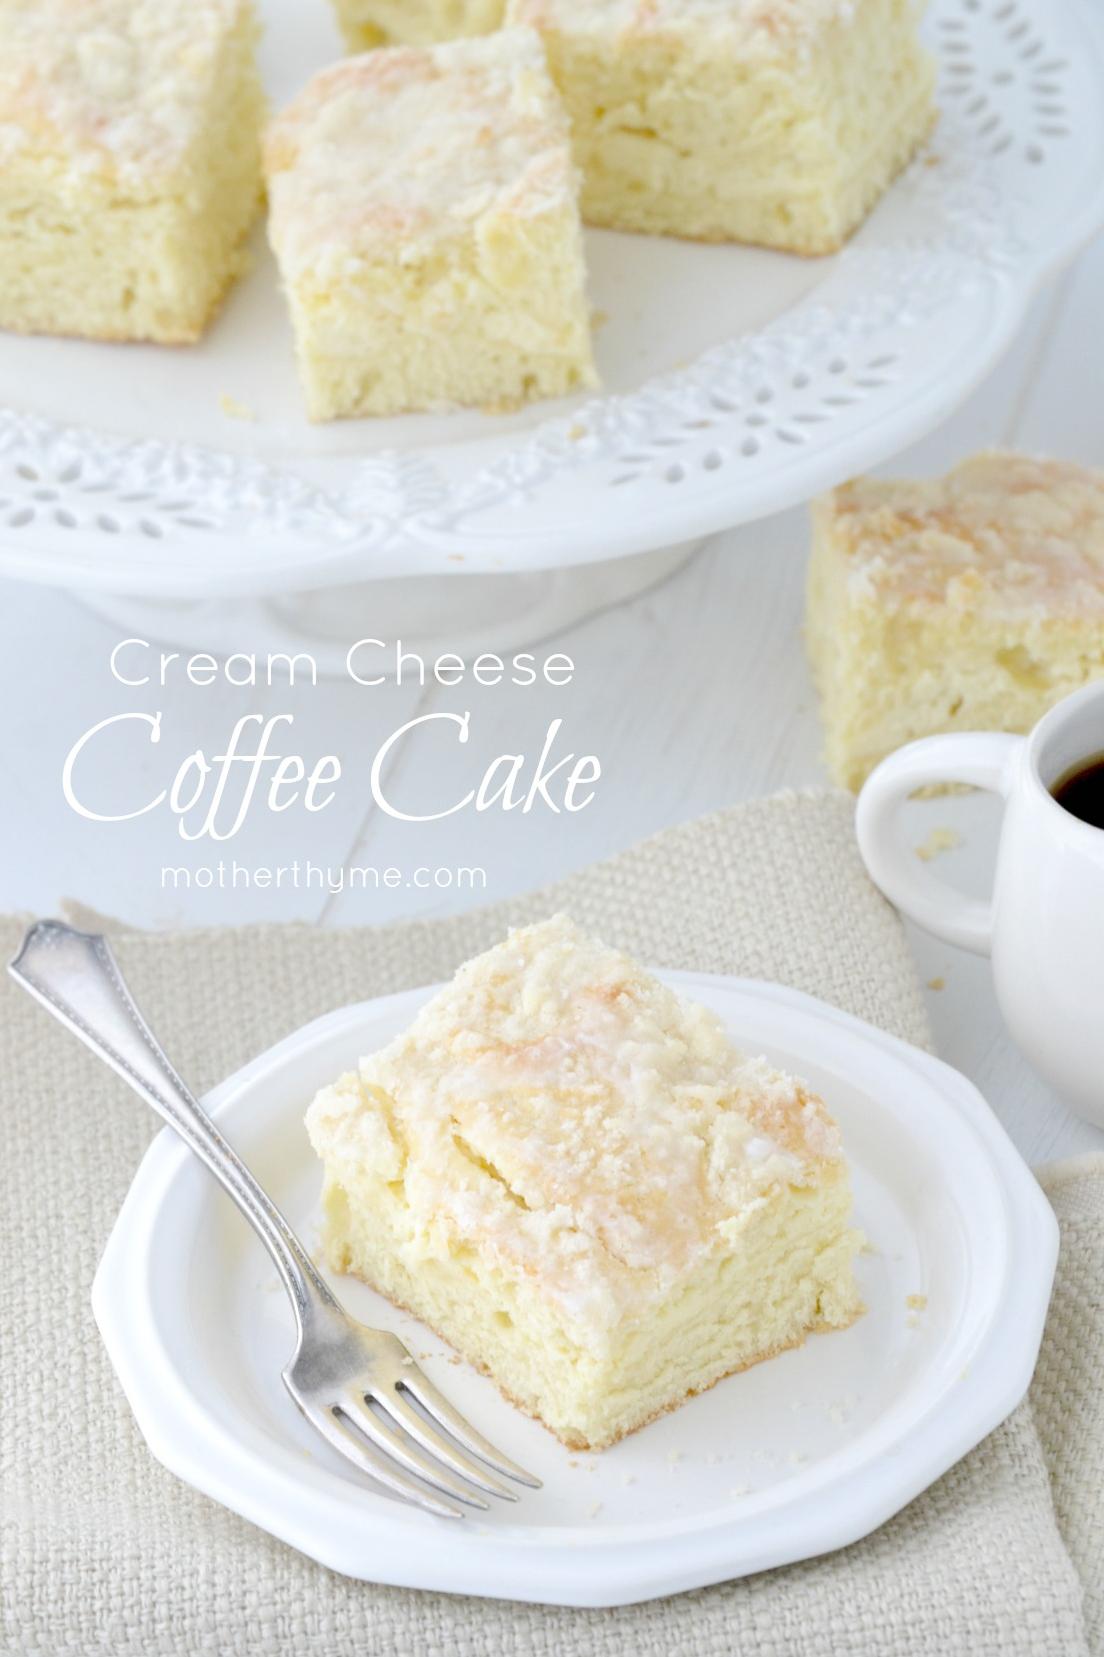  This coffee cake is so good, you might just skip the coffee!